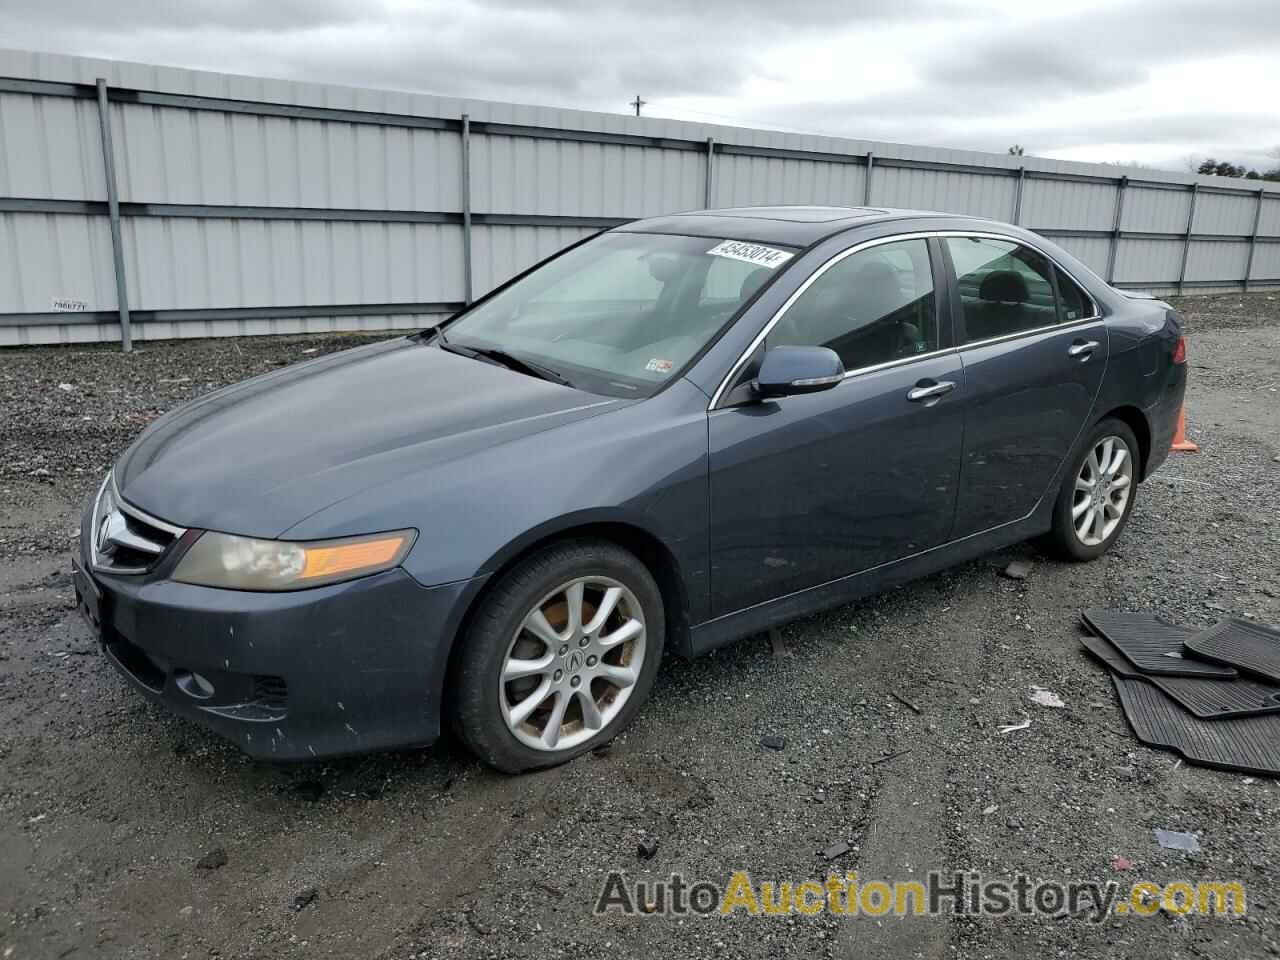 ACURA TSX, JH4CL96987C018350